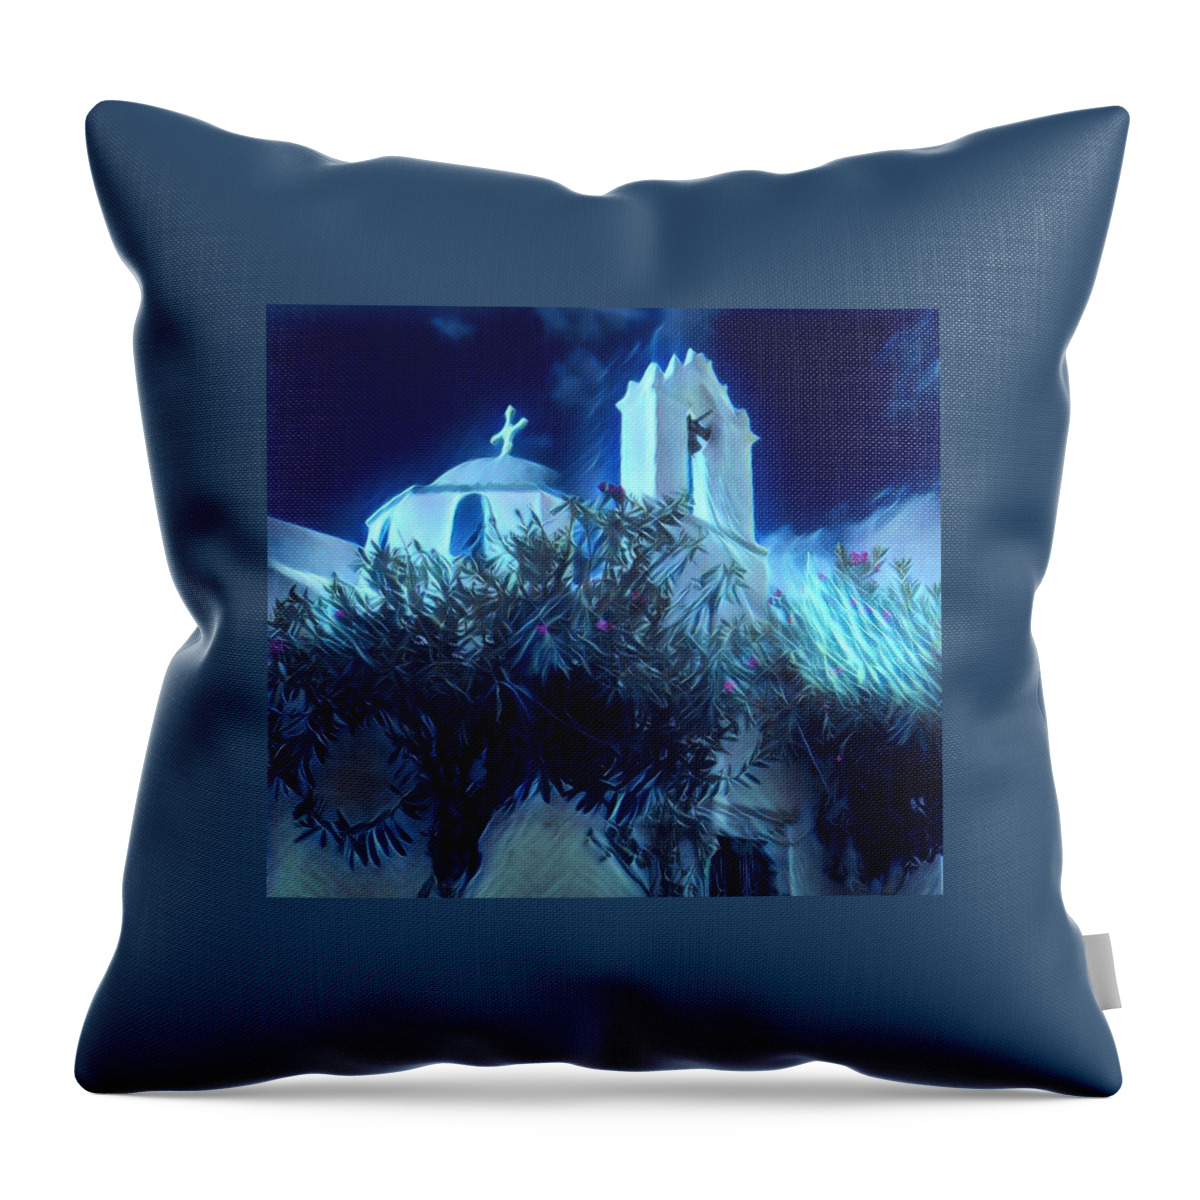 Colette Throw Pillow featuring the photograph Paros Island Beauty Greece by Colette V Hera Guggenheim